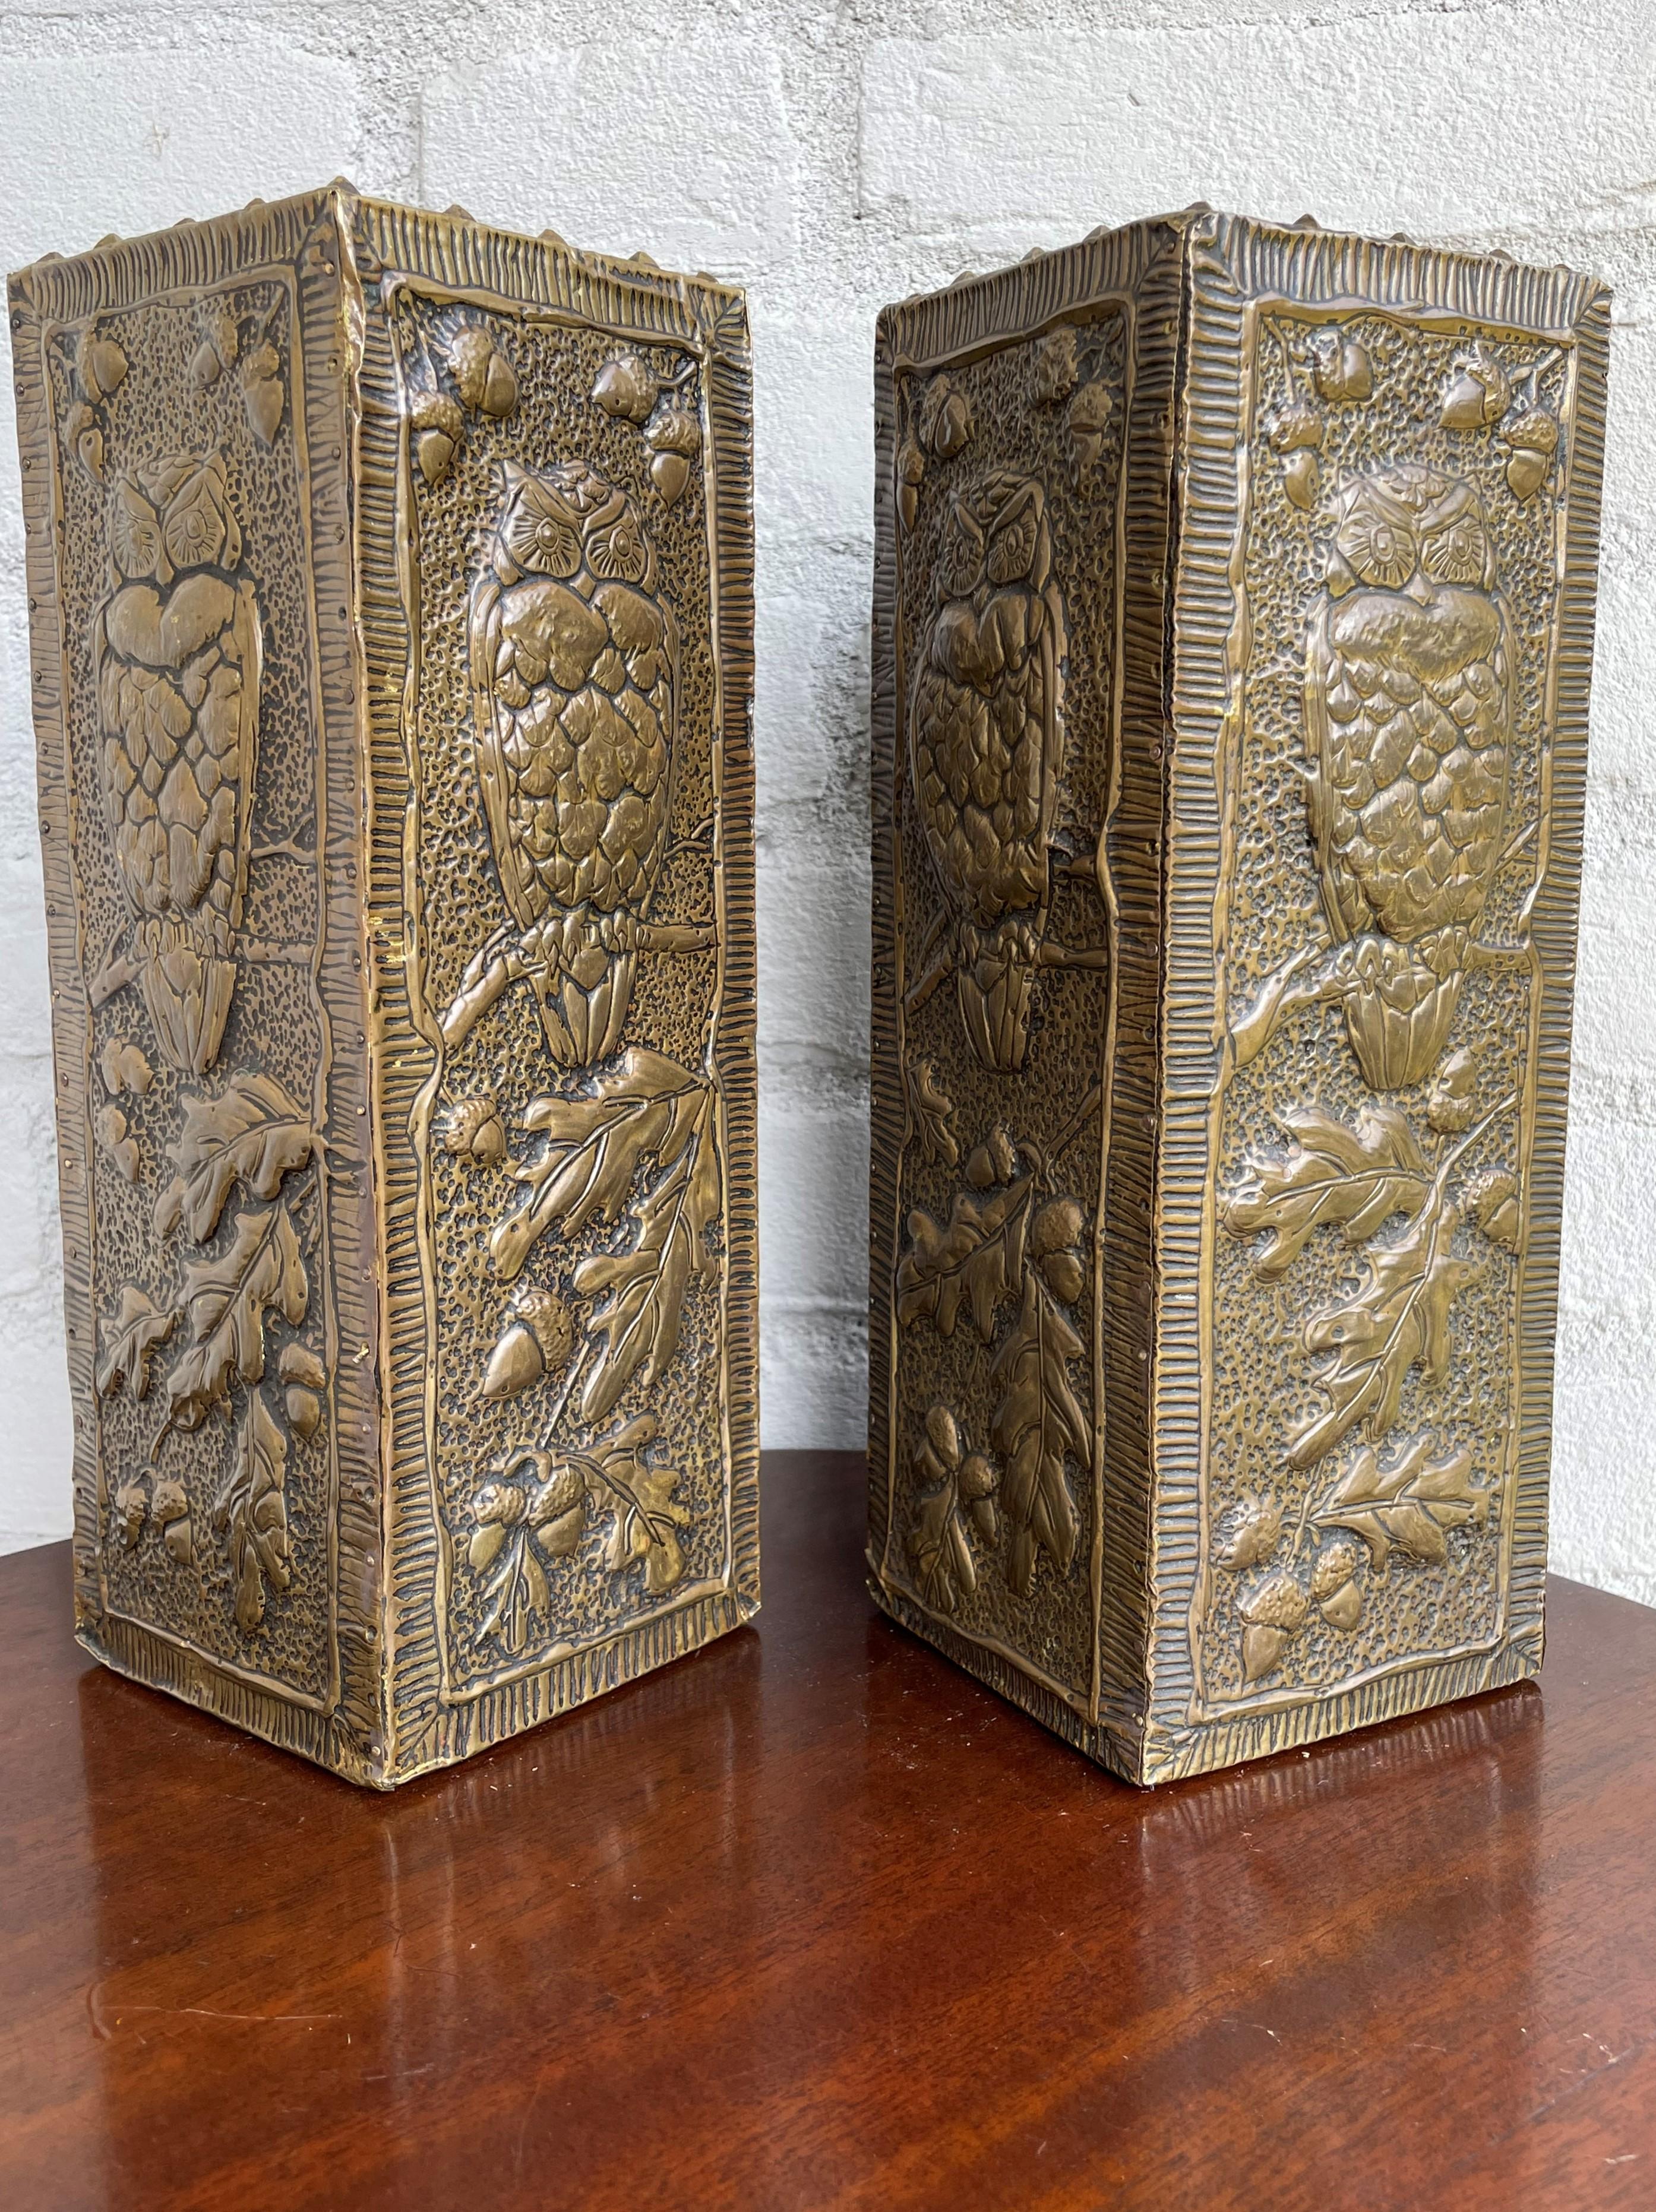 Antique and Unique Arts & Crafts Pair of Embossed Brass Vases w. Owl Sculptures For Sale 2